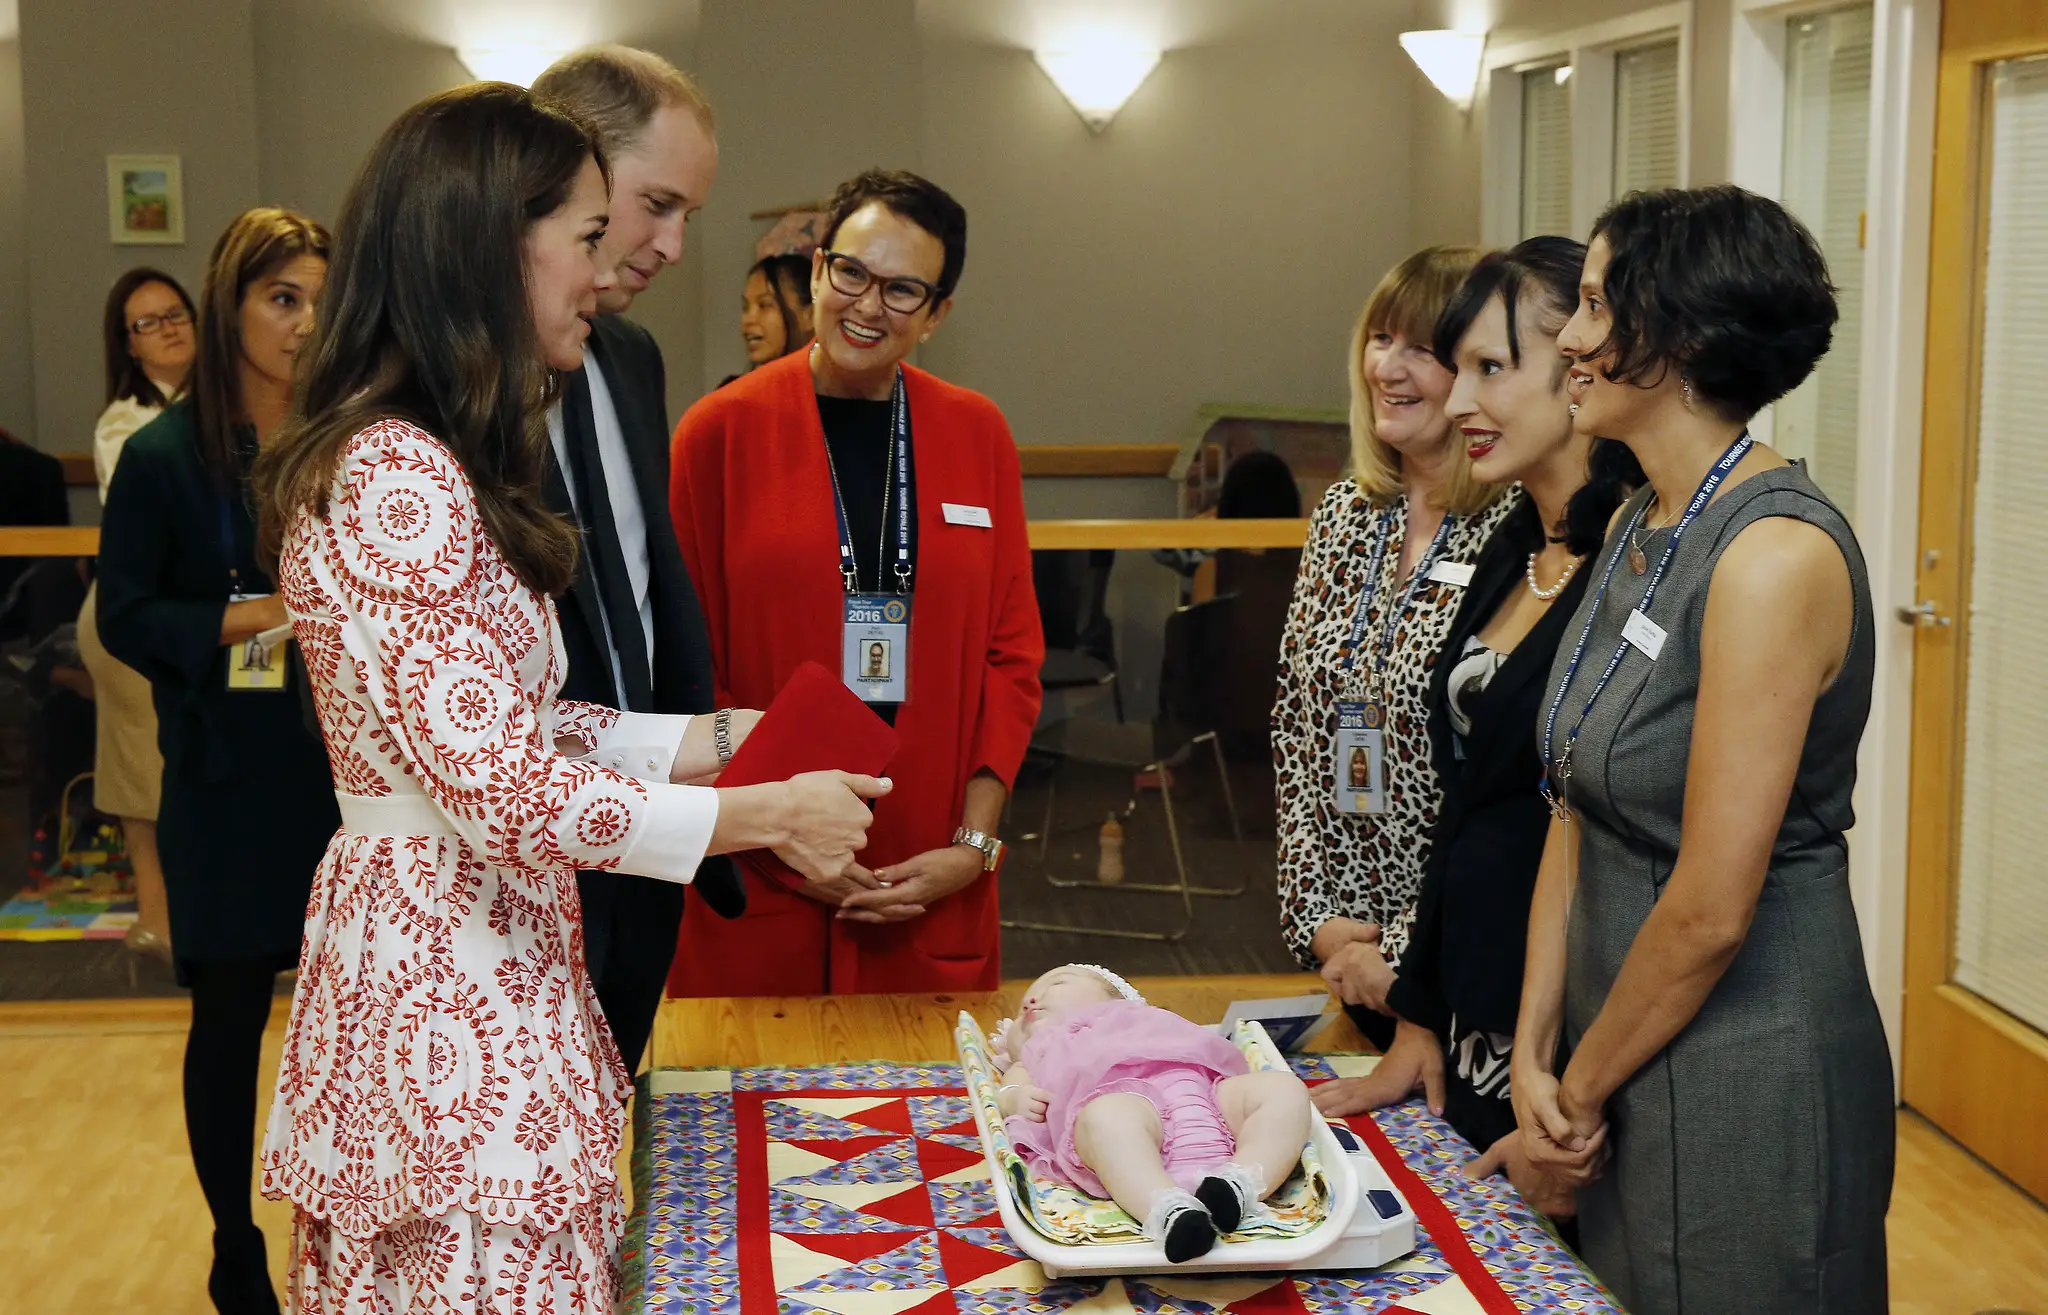 The Duke and Duchess of Cambridge visited Sheway in 2016